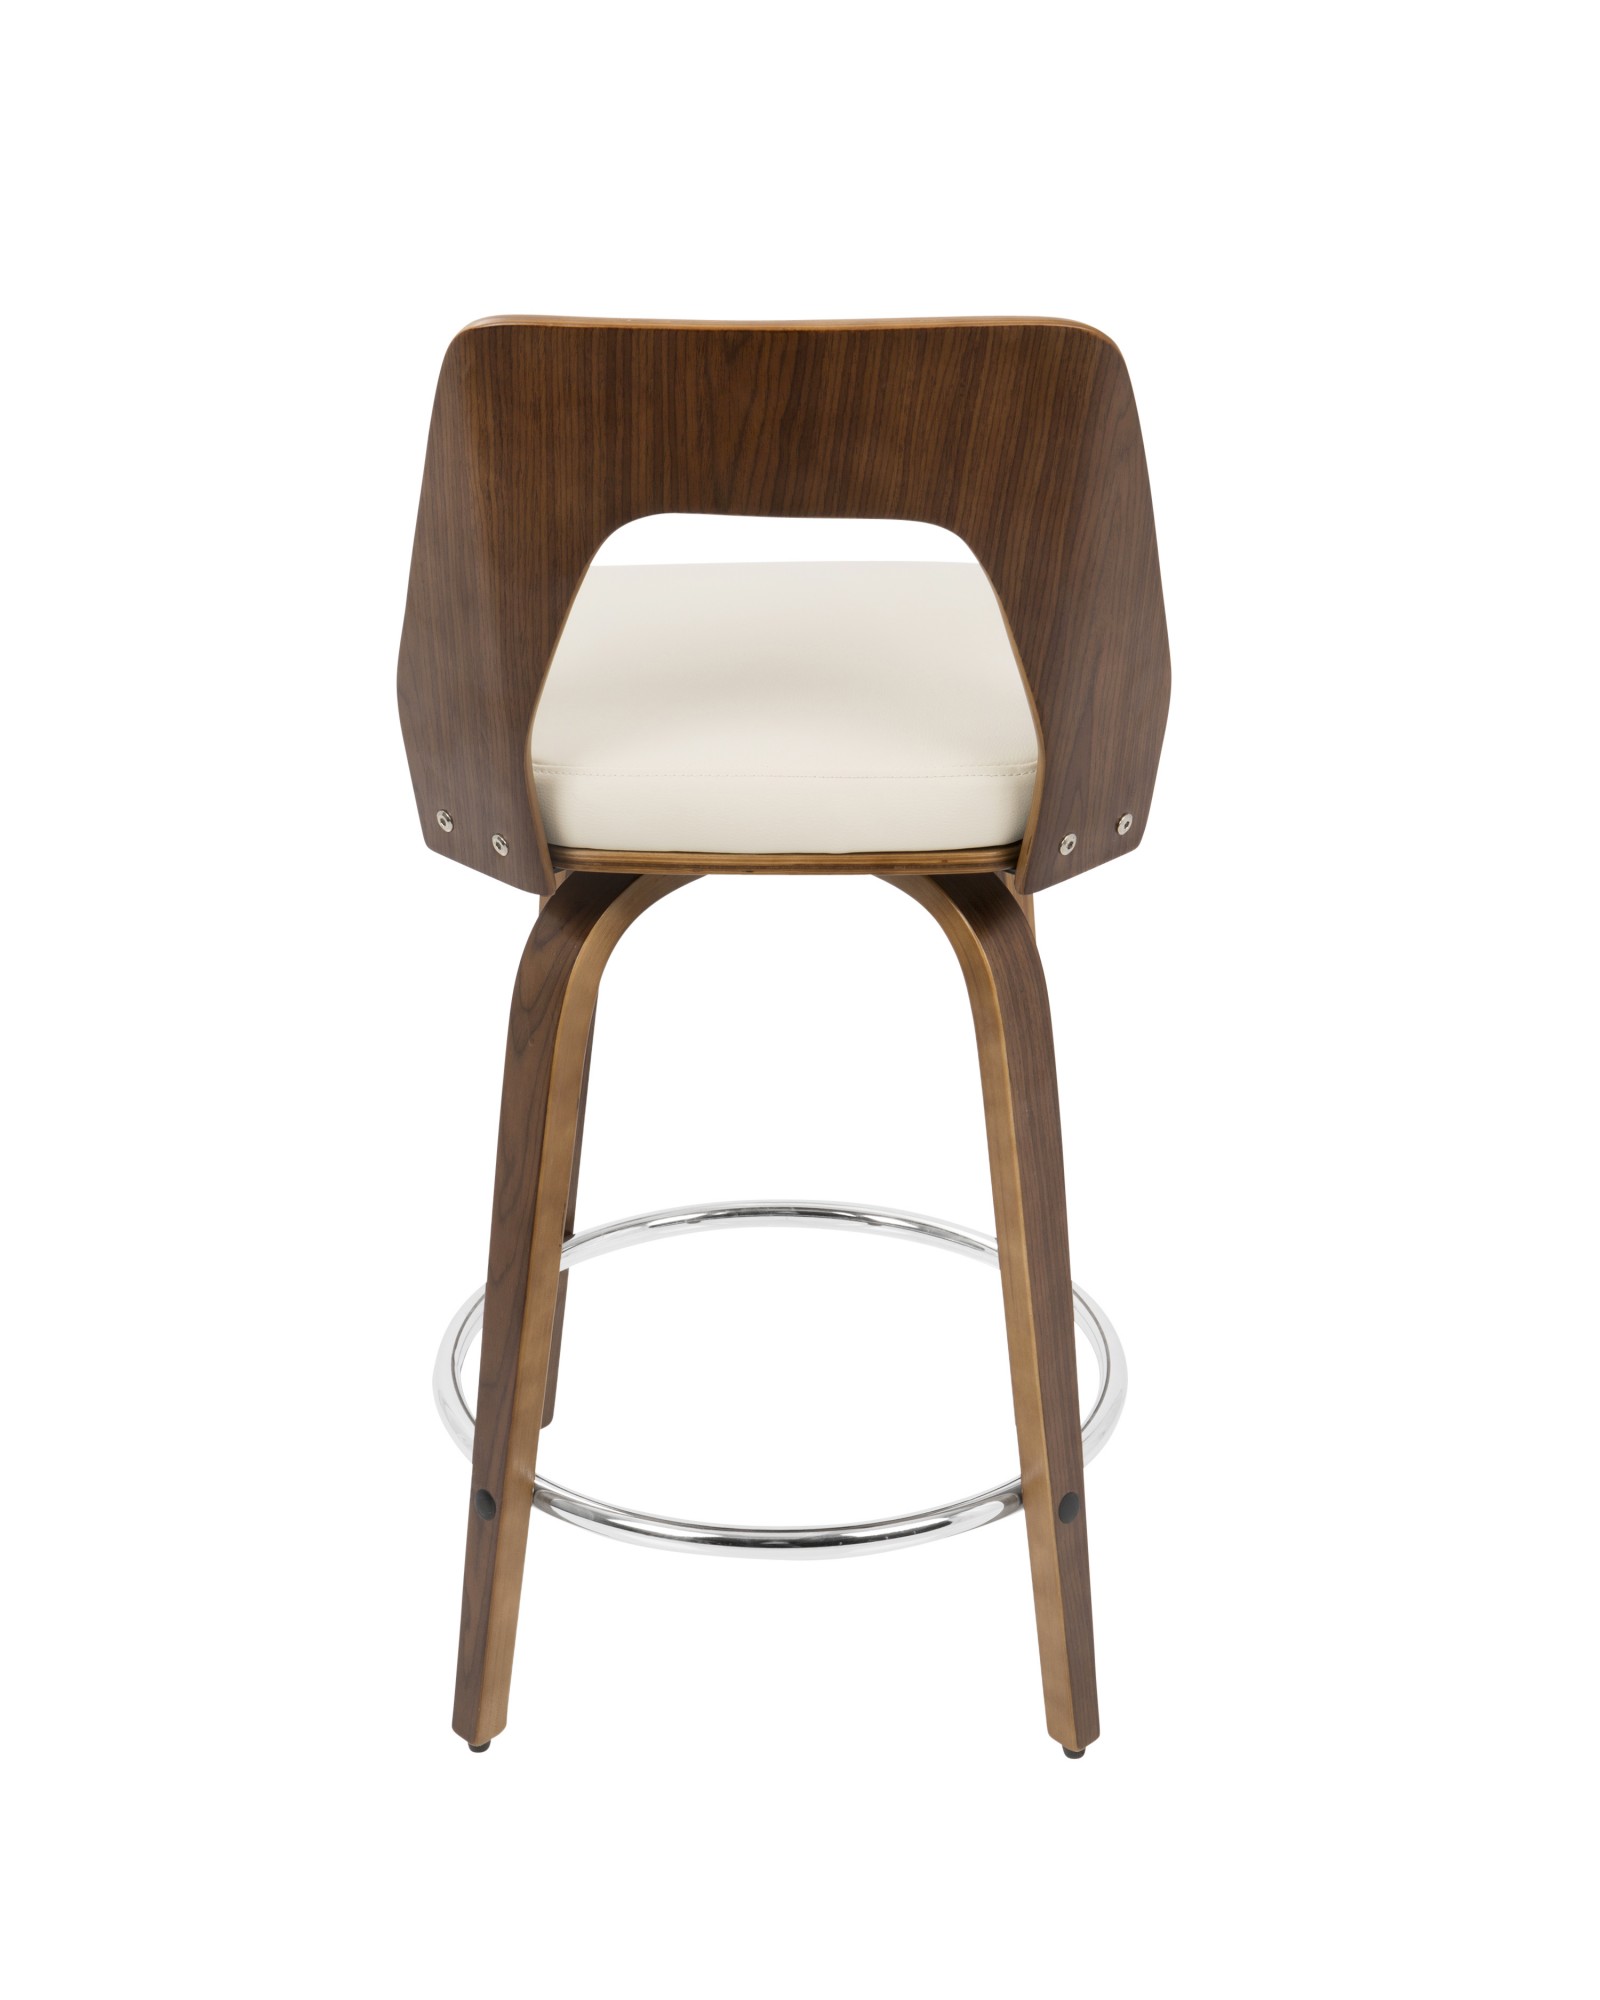 Trilogy Mid-Century Modern Counter Stool in Walnut and Cream Faux Leather